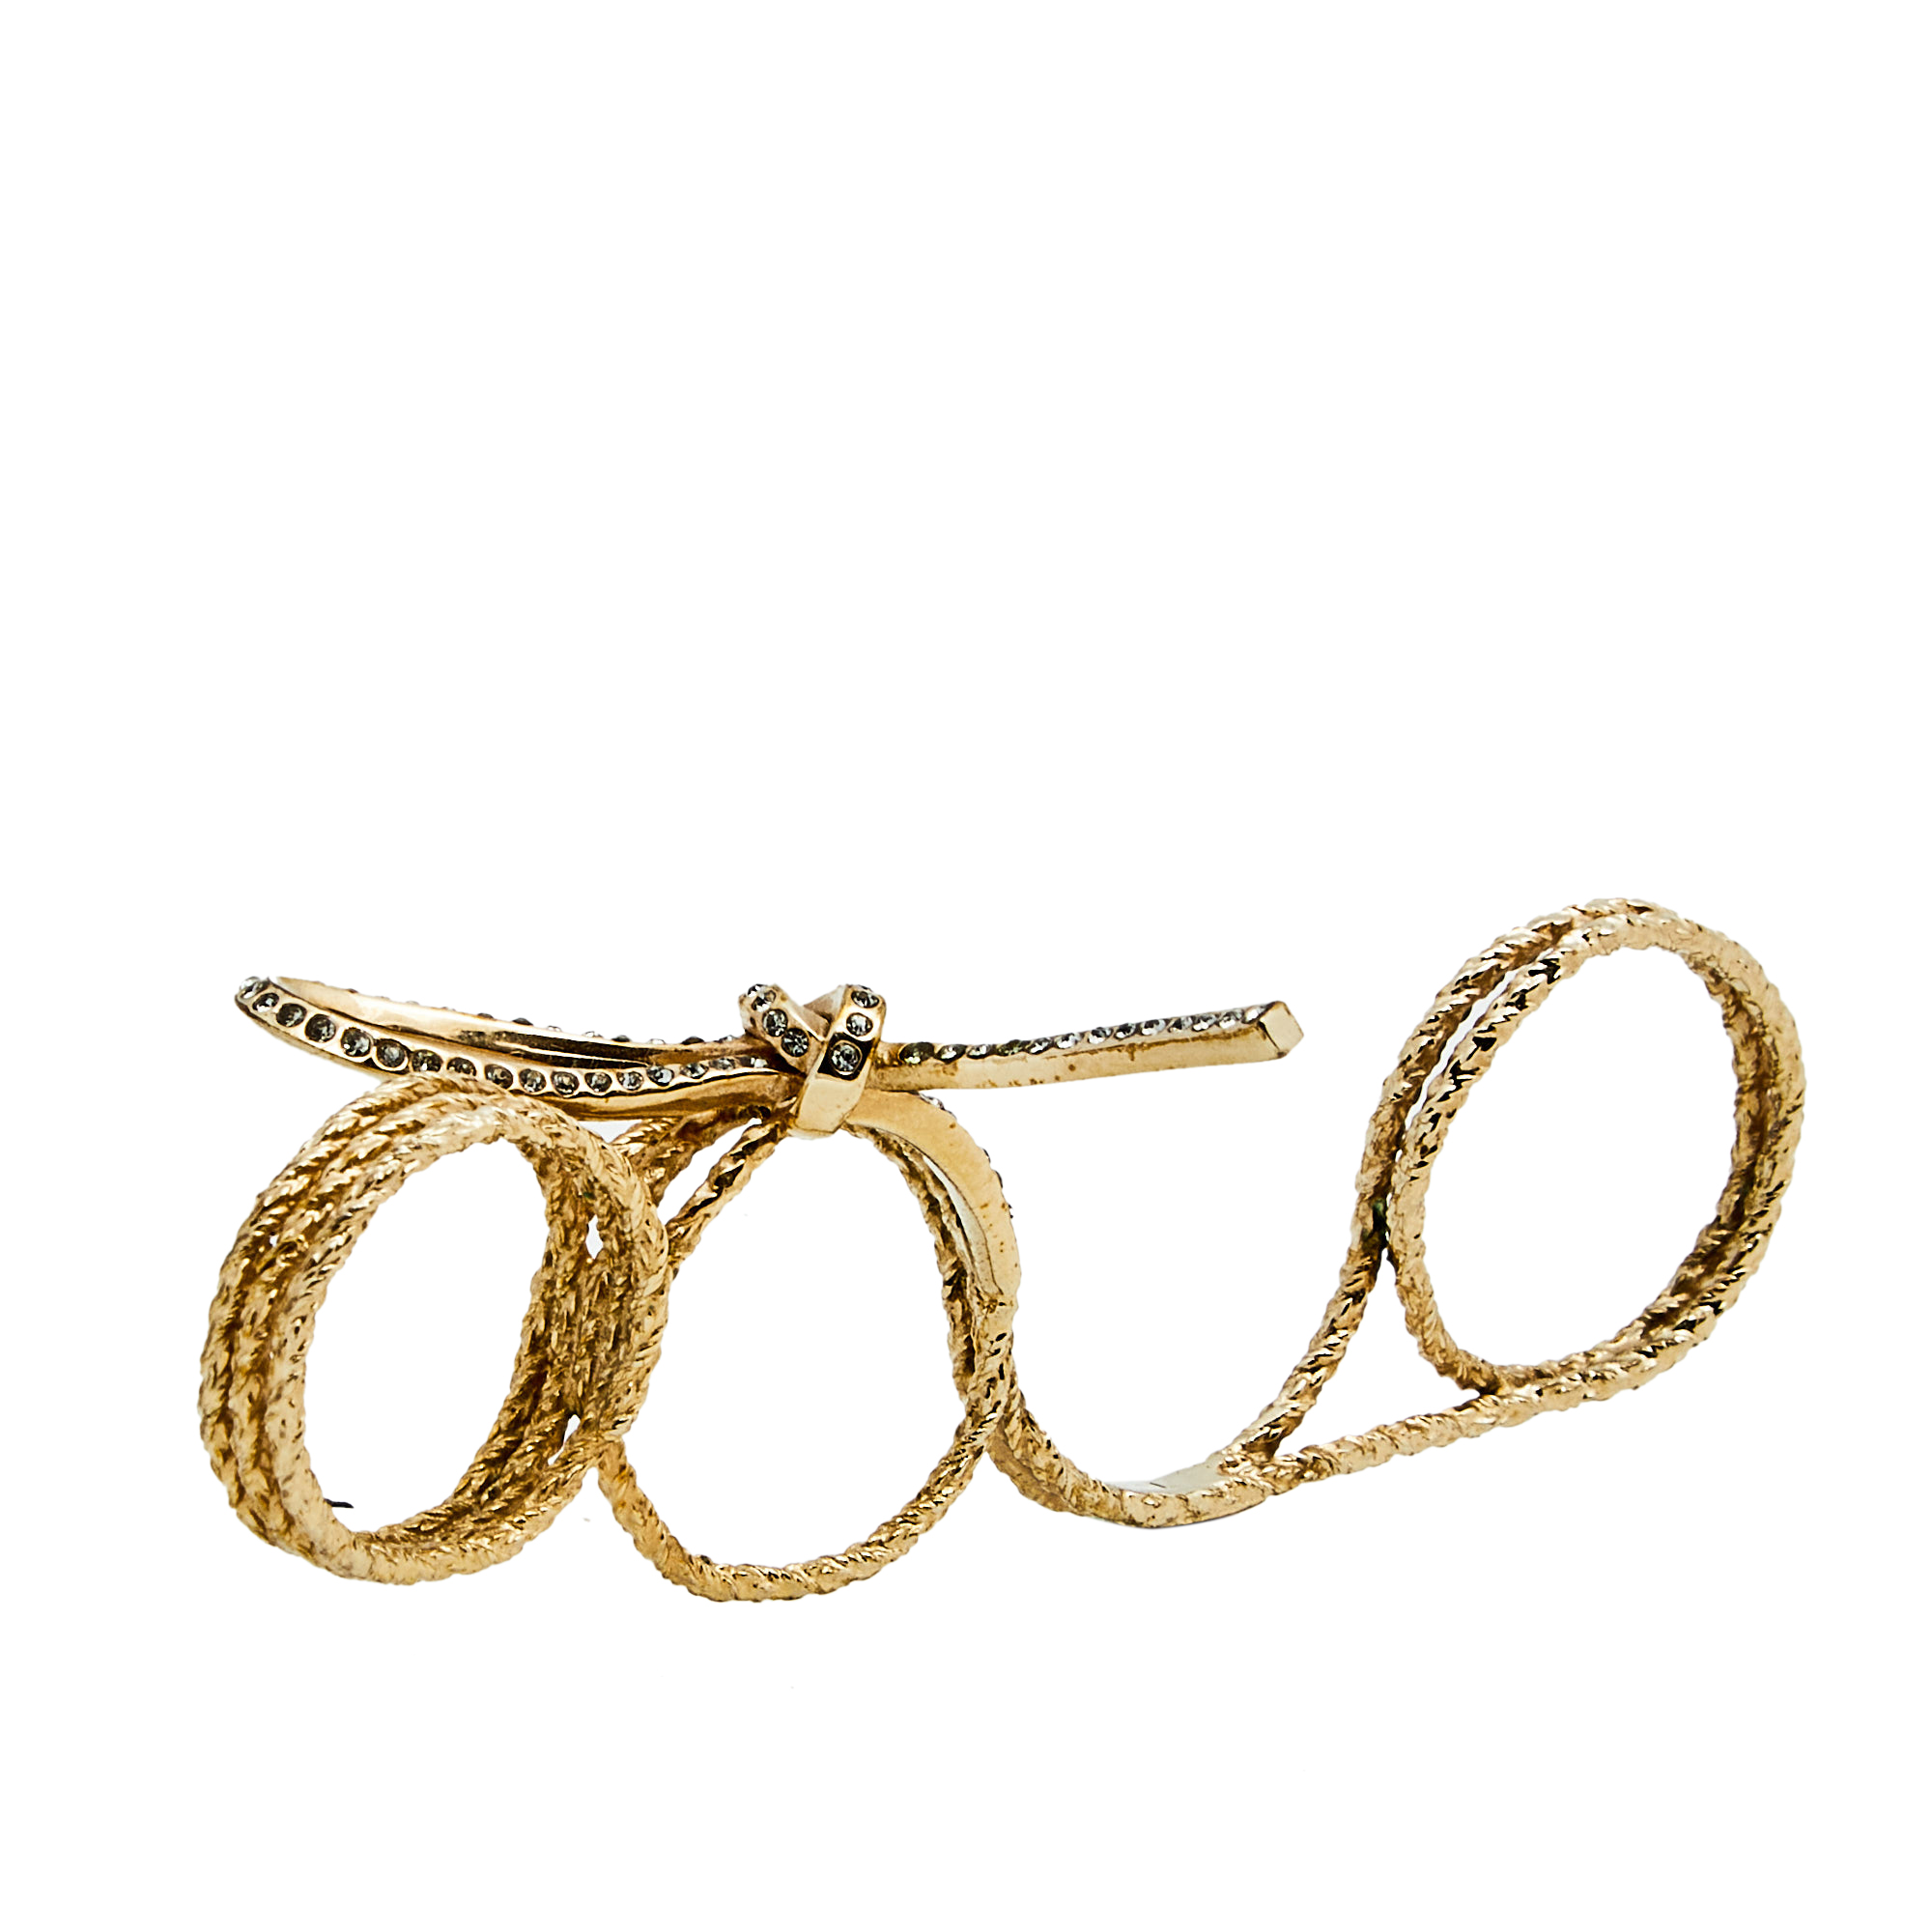 Christian Dior yet again brings a stunning ring that makes us marvel at its beauty and craftsmanship. Sculpted using gold tone metal and then shaped like a coiled thread tie the silhouette will effortlessly fit three fingers. It is topped with a rugged looking bow accented with dazzling crystals.